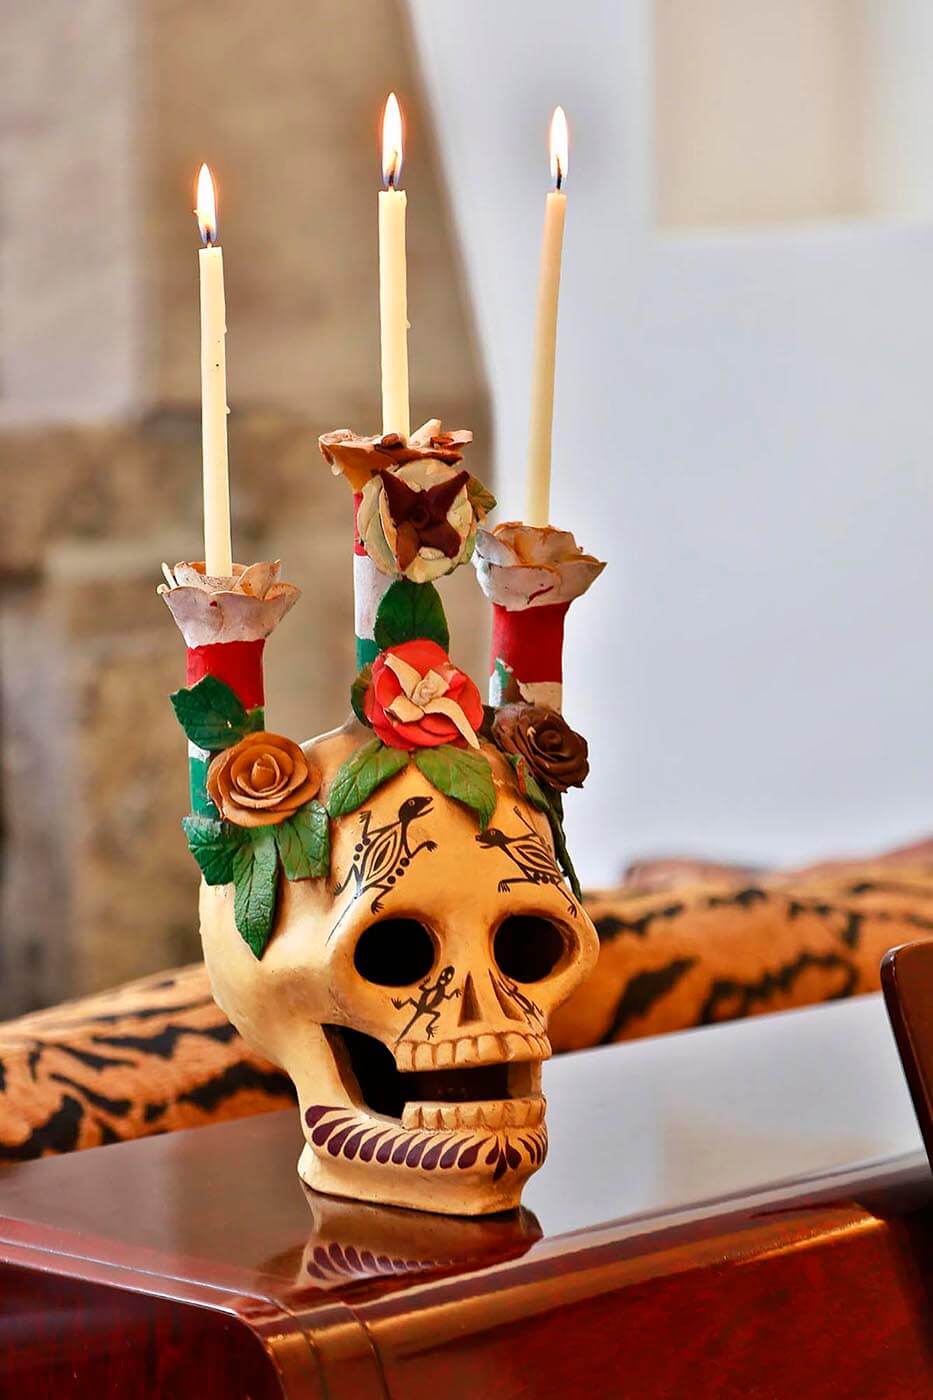 A SKULL CANDELABRA decorates a home in SAN MIGUEL DE ALLENDE, MEXICO.  - Architecture photography by Eagle Visions Photography